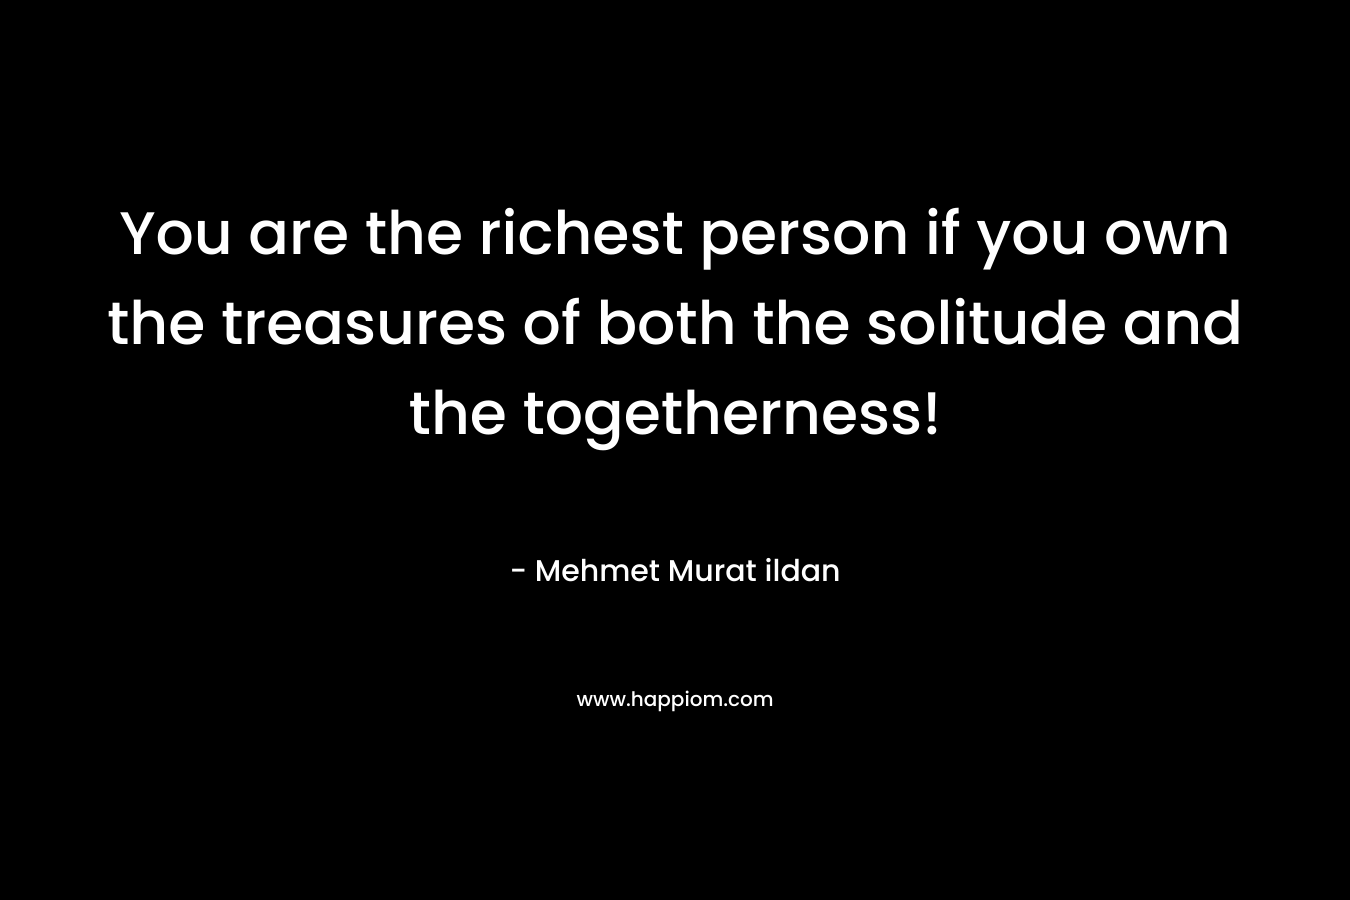 You are the richest person if you own the treasures of both the solitude and the togetherness!